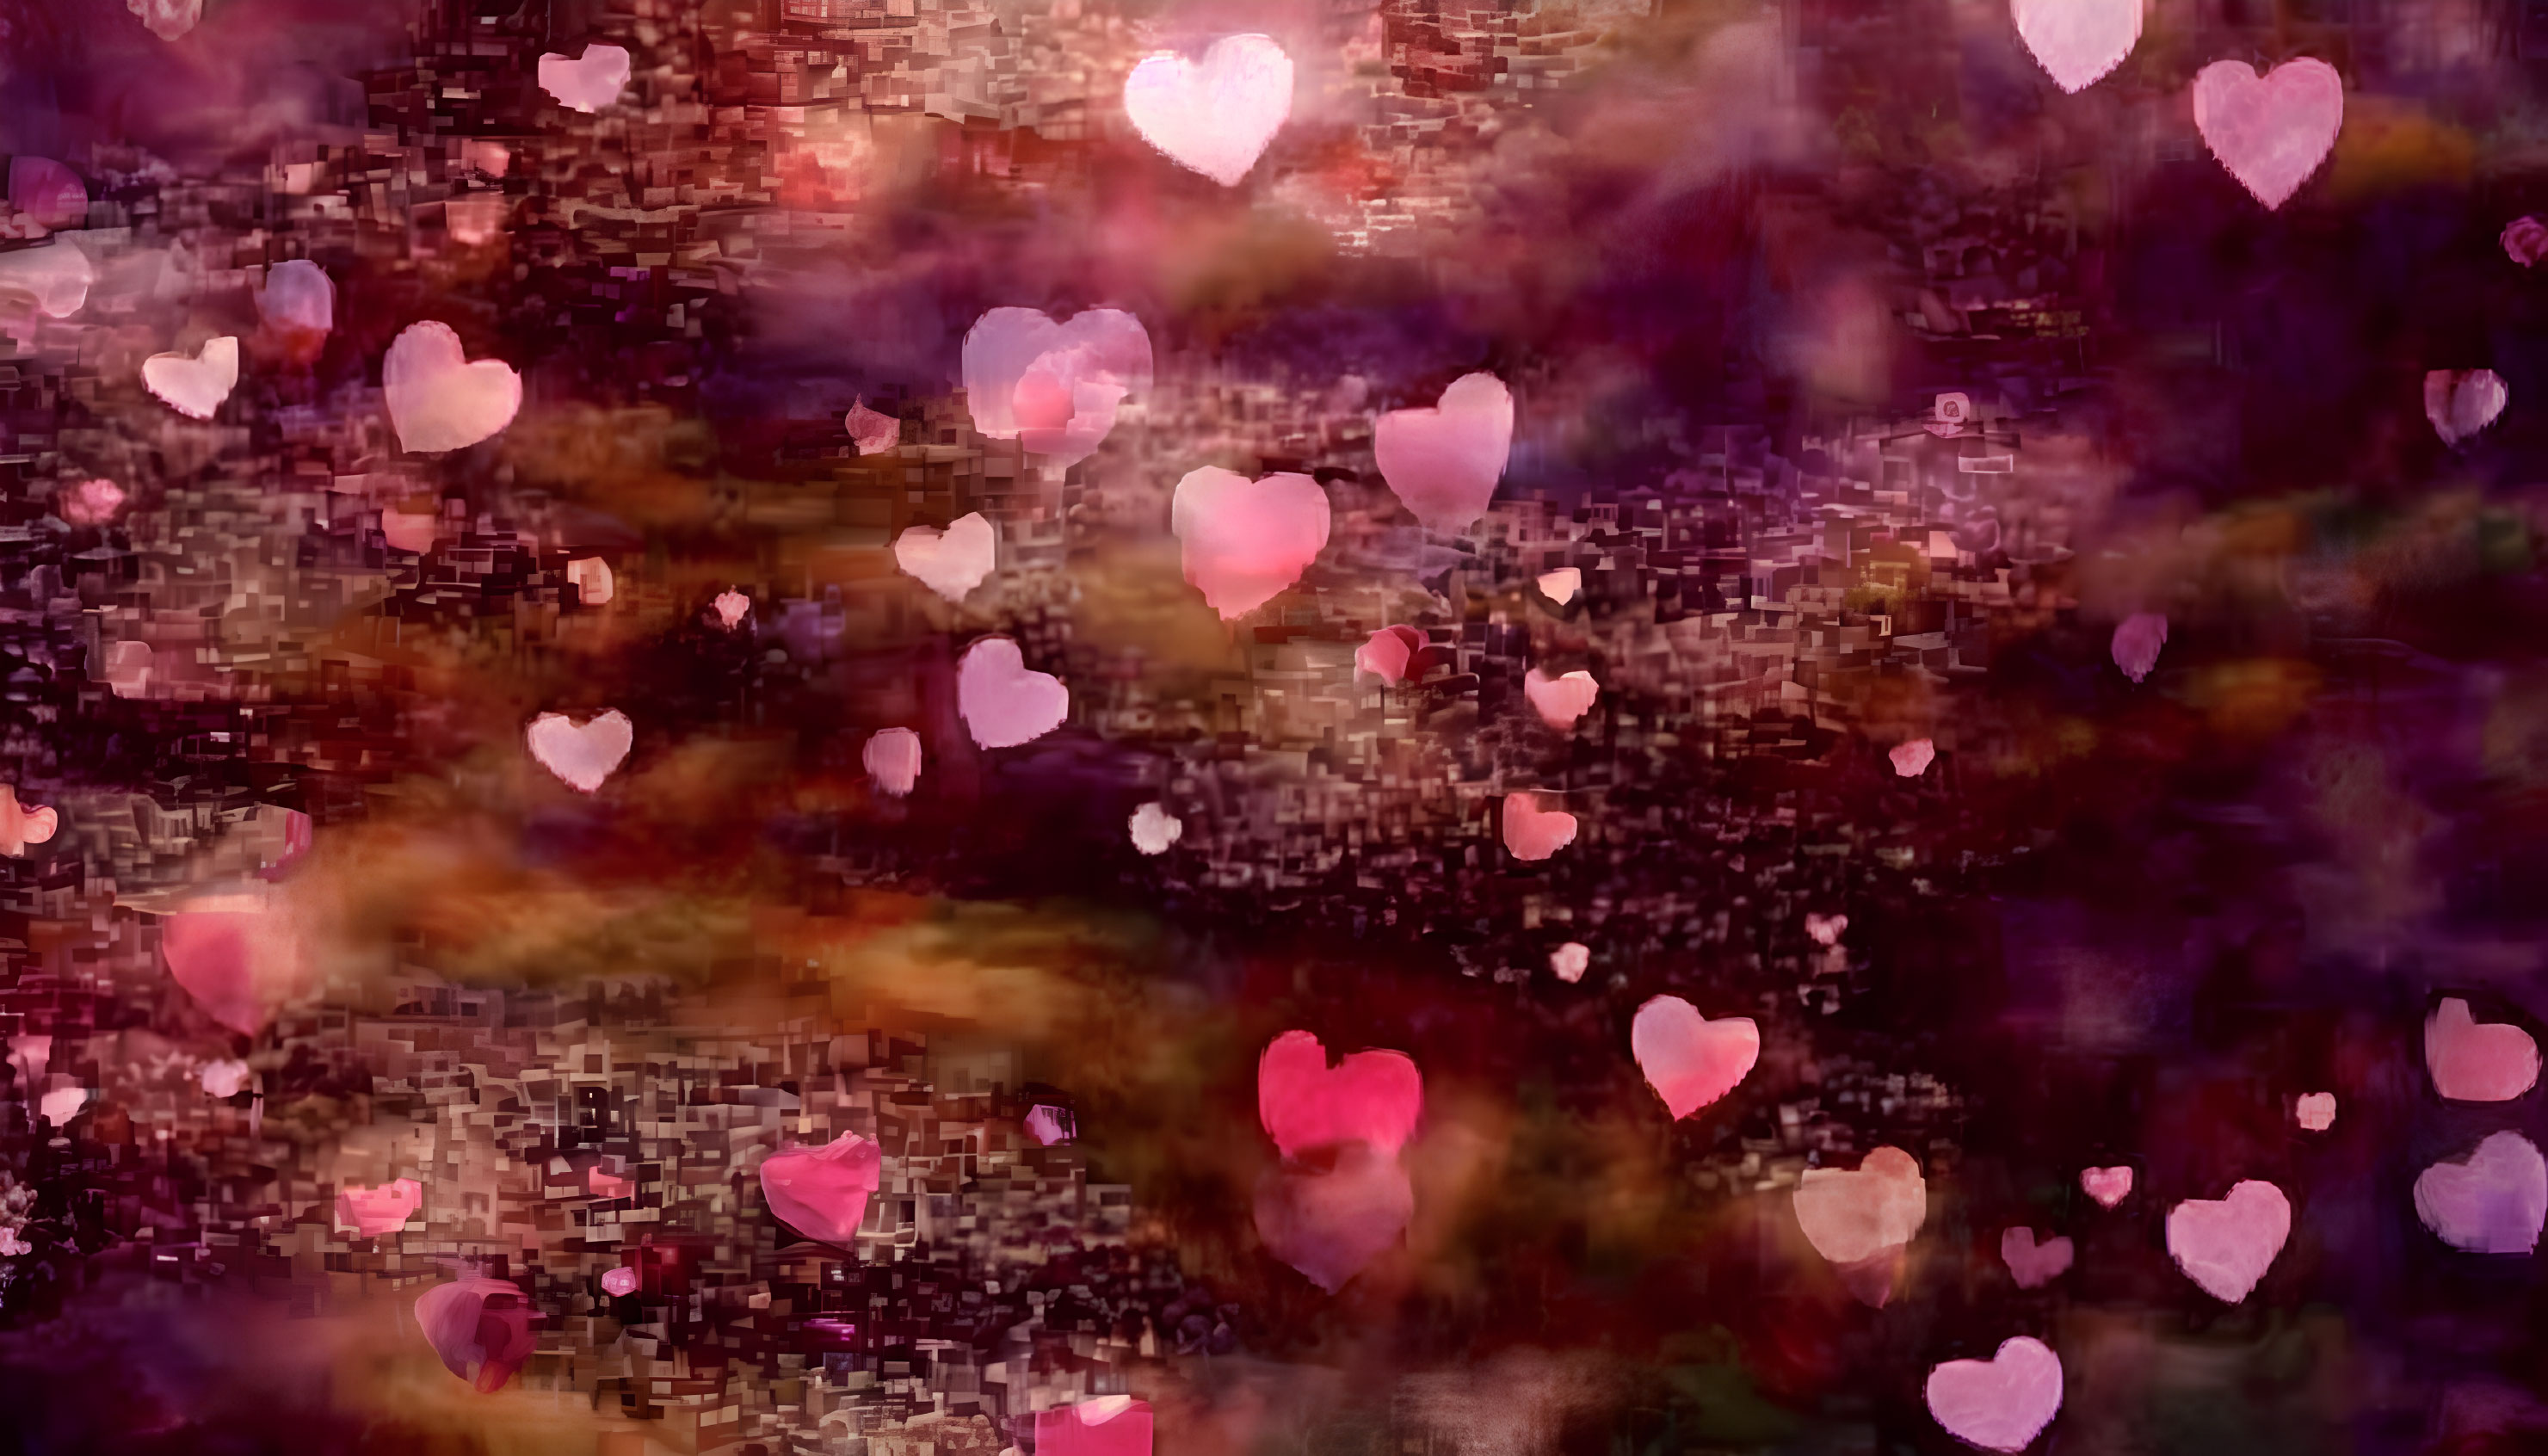 Warm-colored abstract blur with translucent pink and red hearts, evoking a romantic ambiance.